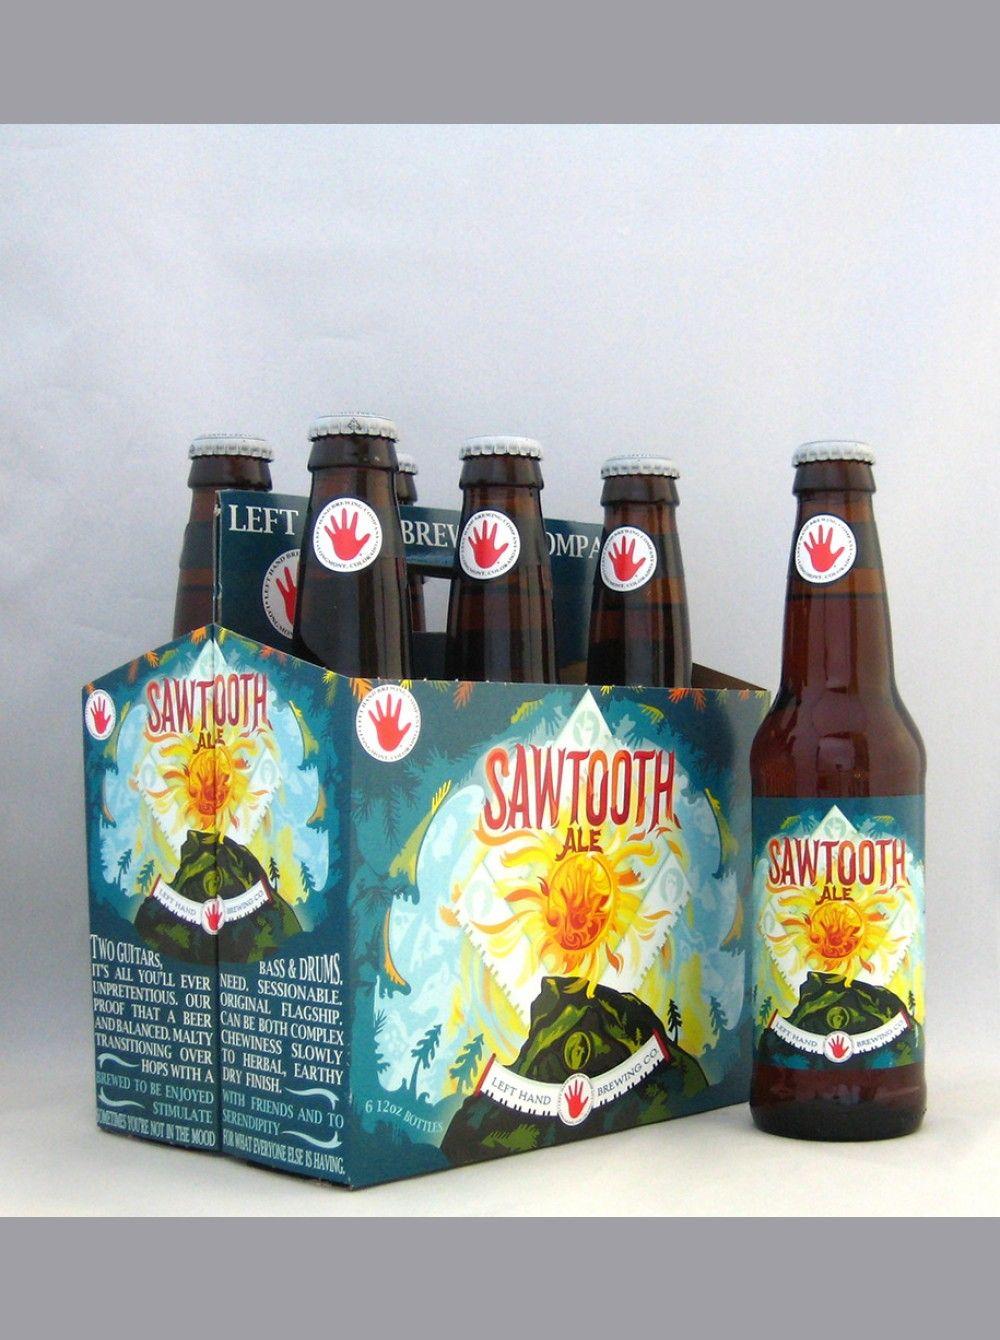 Sawtooth Beer Logo - LEFT HAND SAWTOOTH ALE EXTRA SPECIAL/STRONG BITTER (ESB)